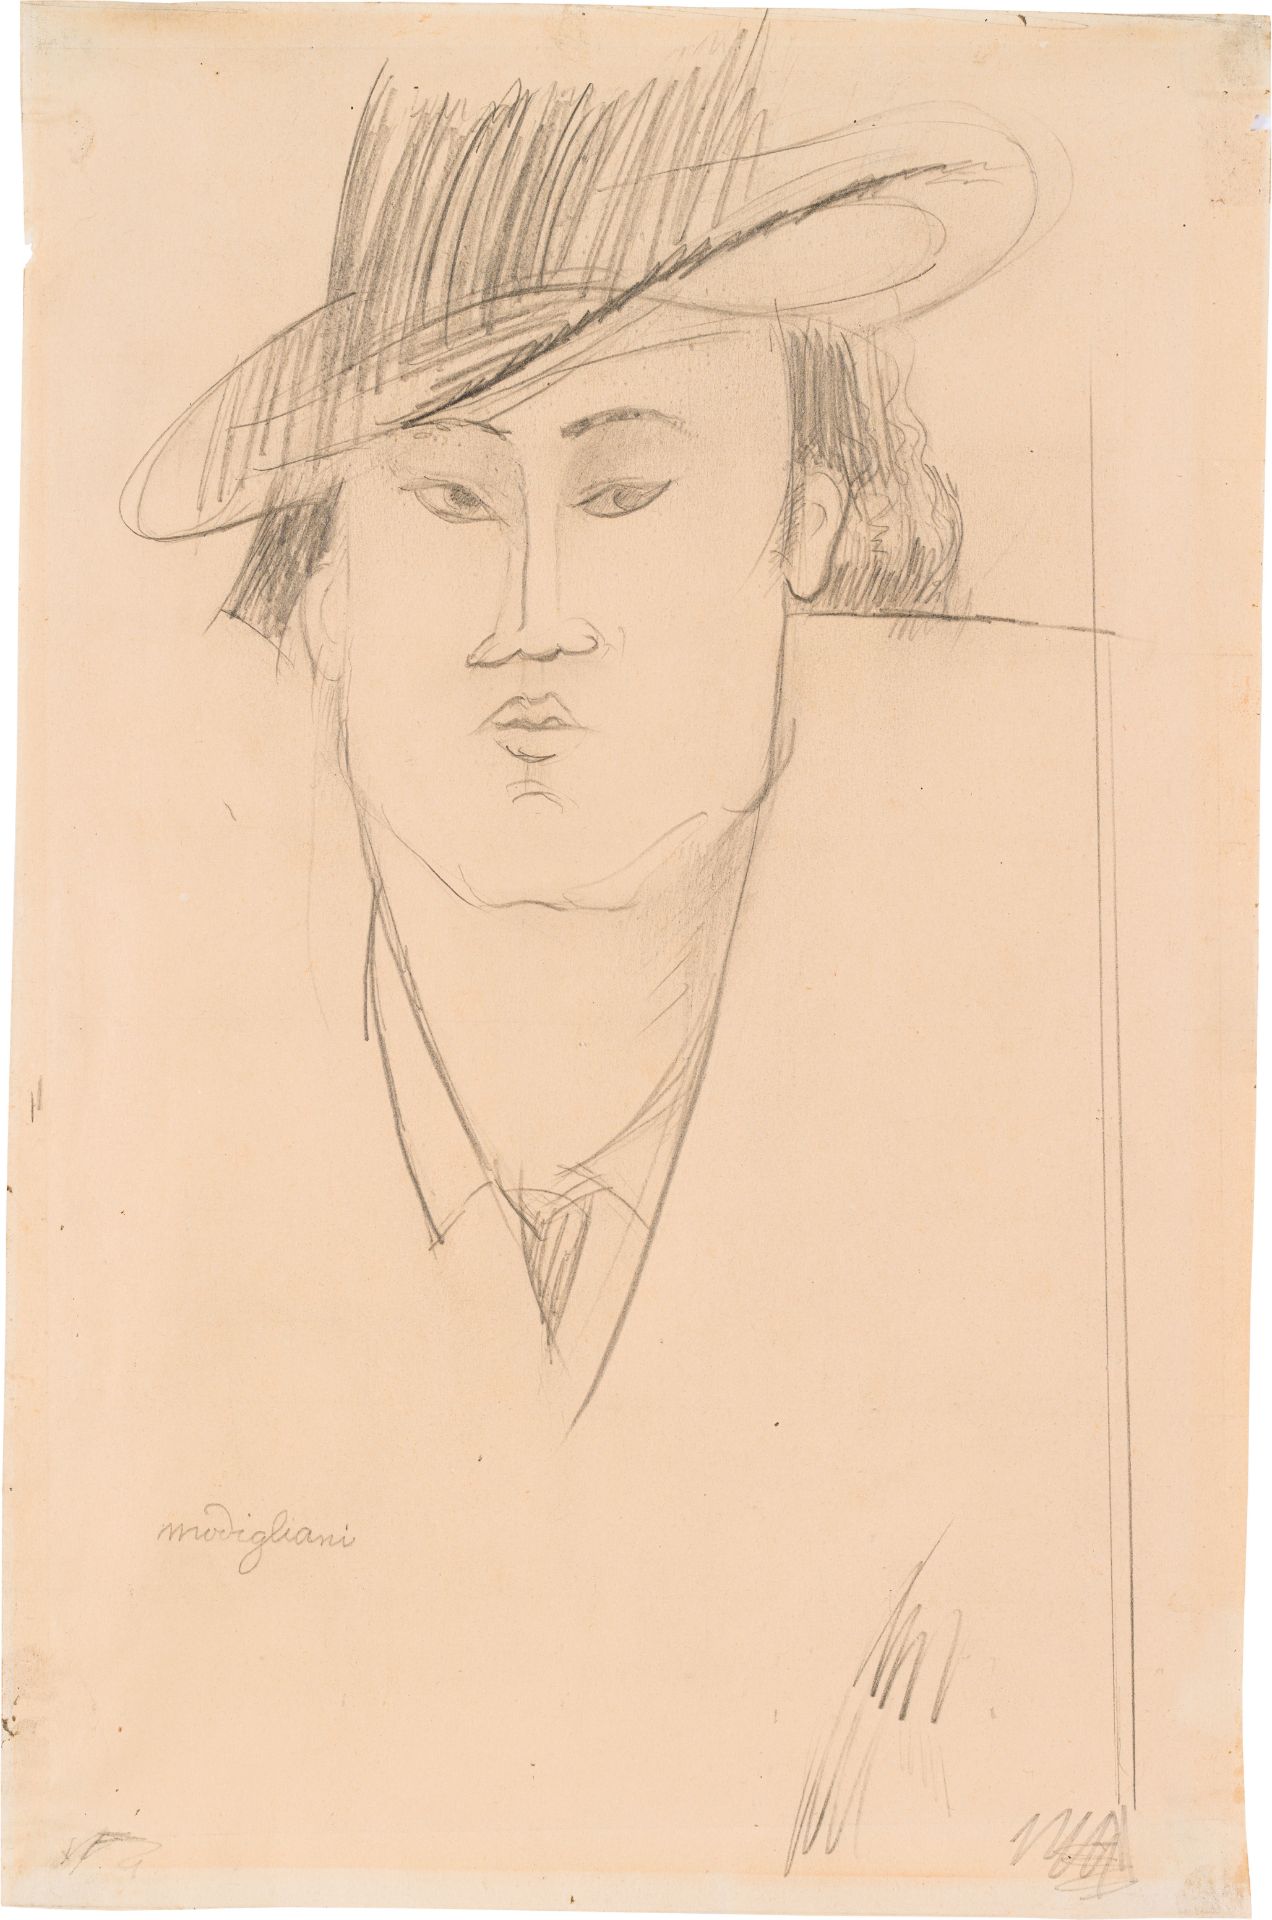  Amedeo Modigliani Attributed to: Portrait of a man